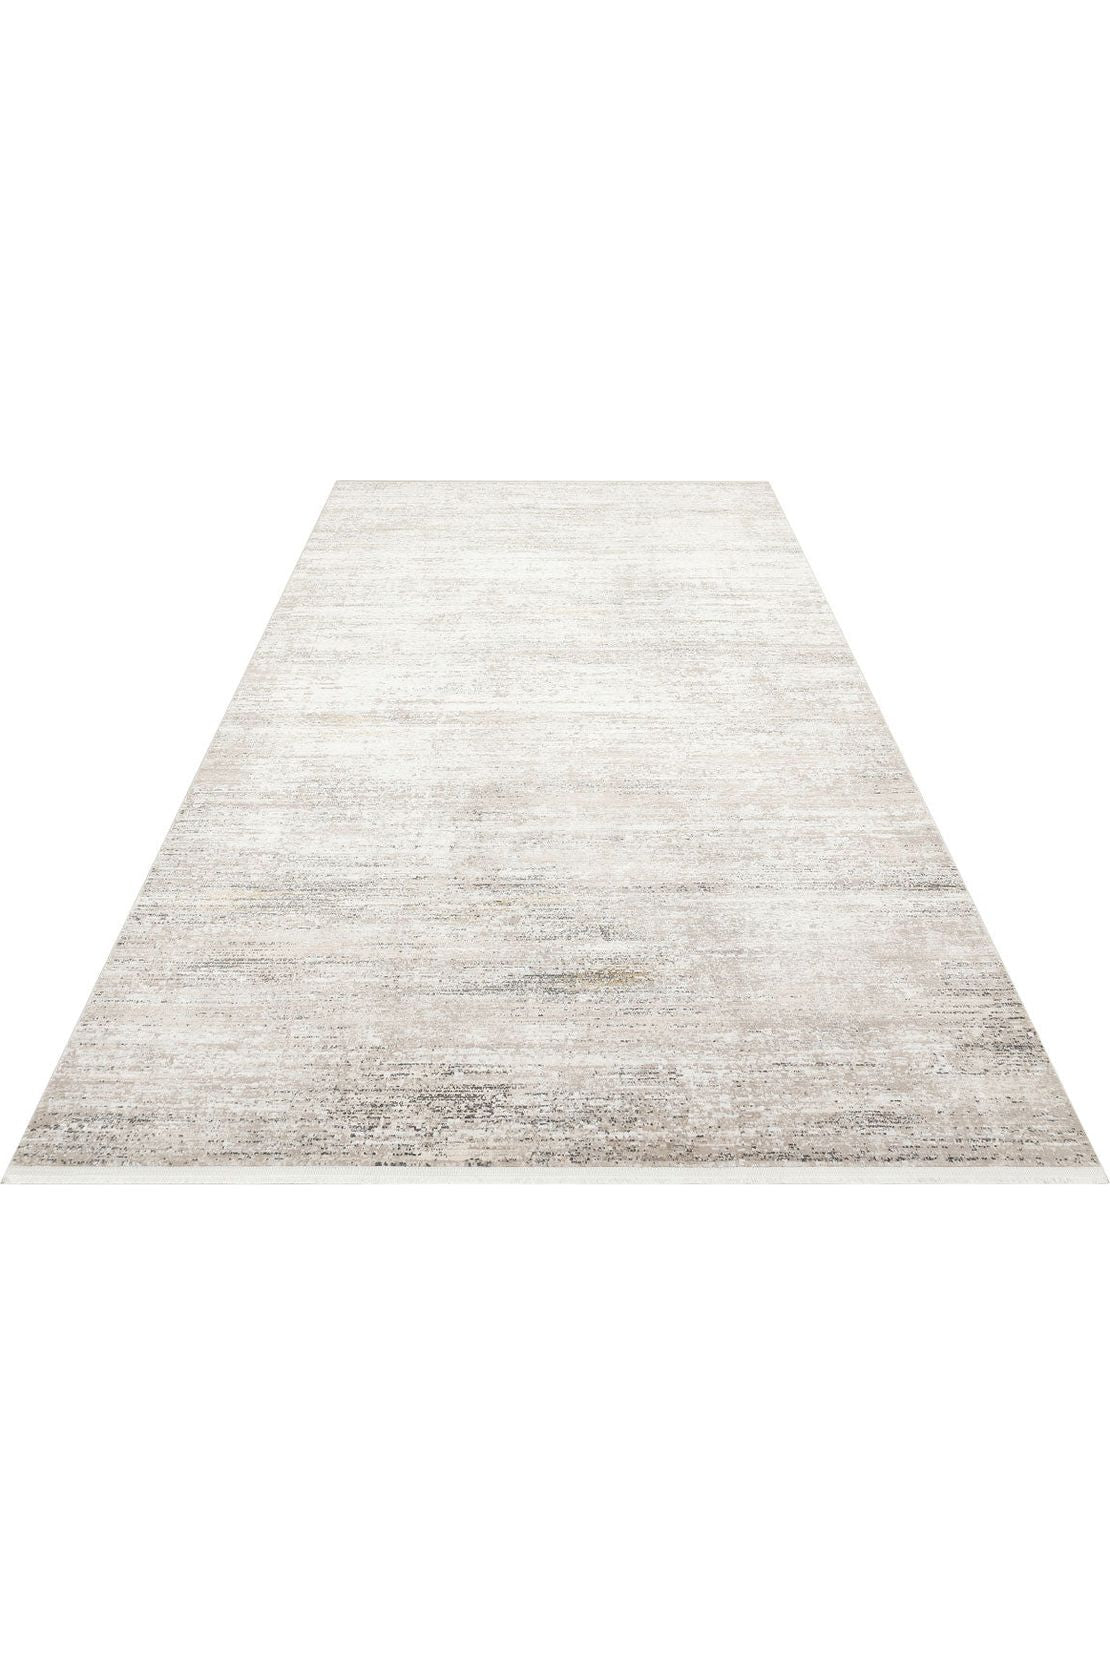 #Turkish_Carpets_Rugs# #Modern_Carpets# #Abrash_Carpets#Elegant Rugs With Acrylic And PolyesterZrh 01 Cream Grey